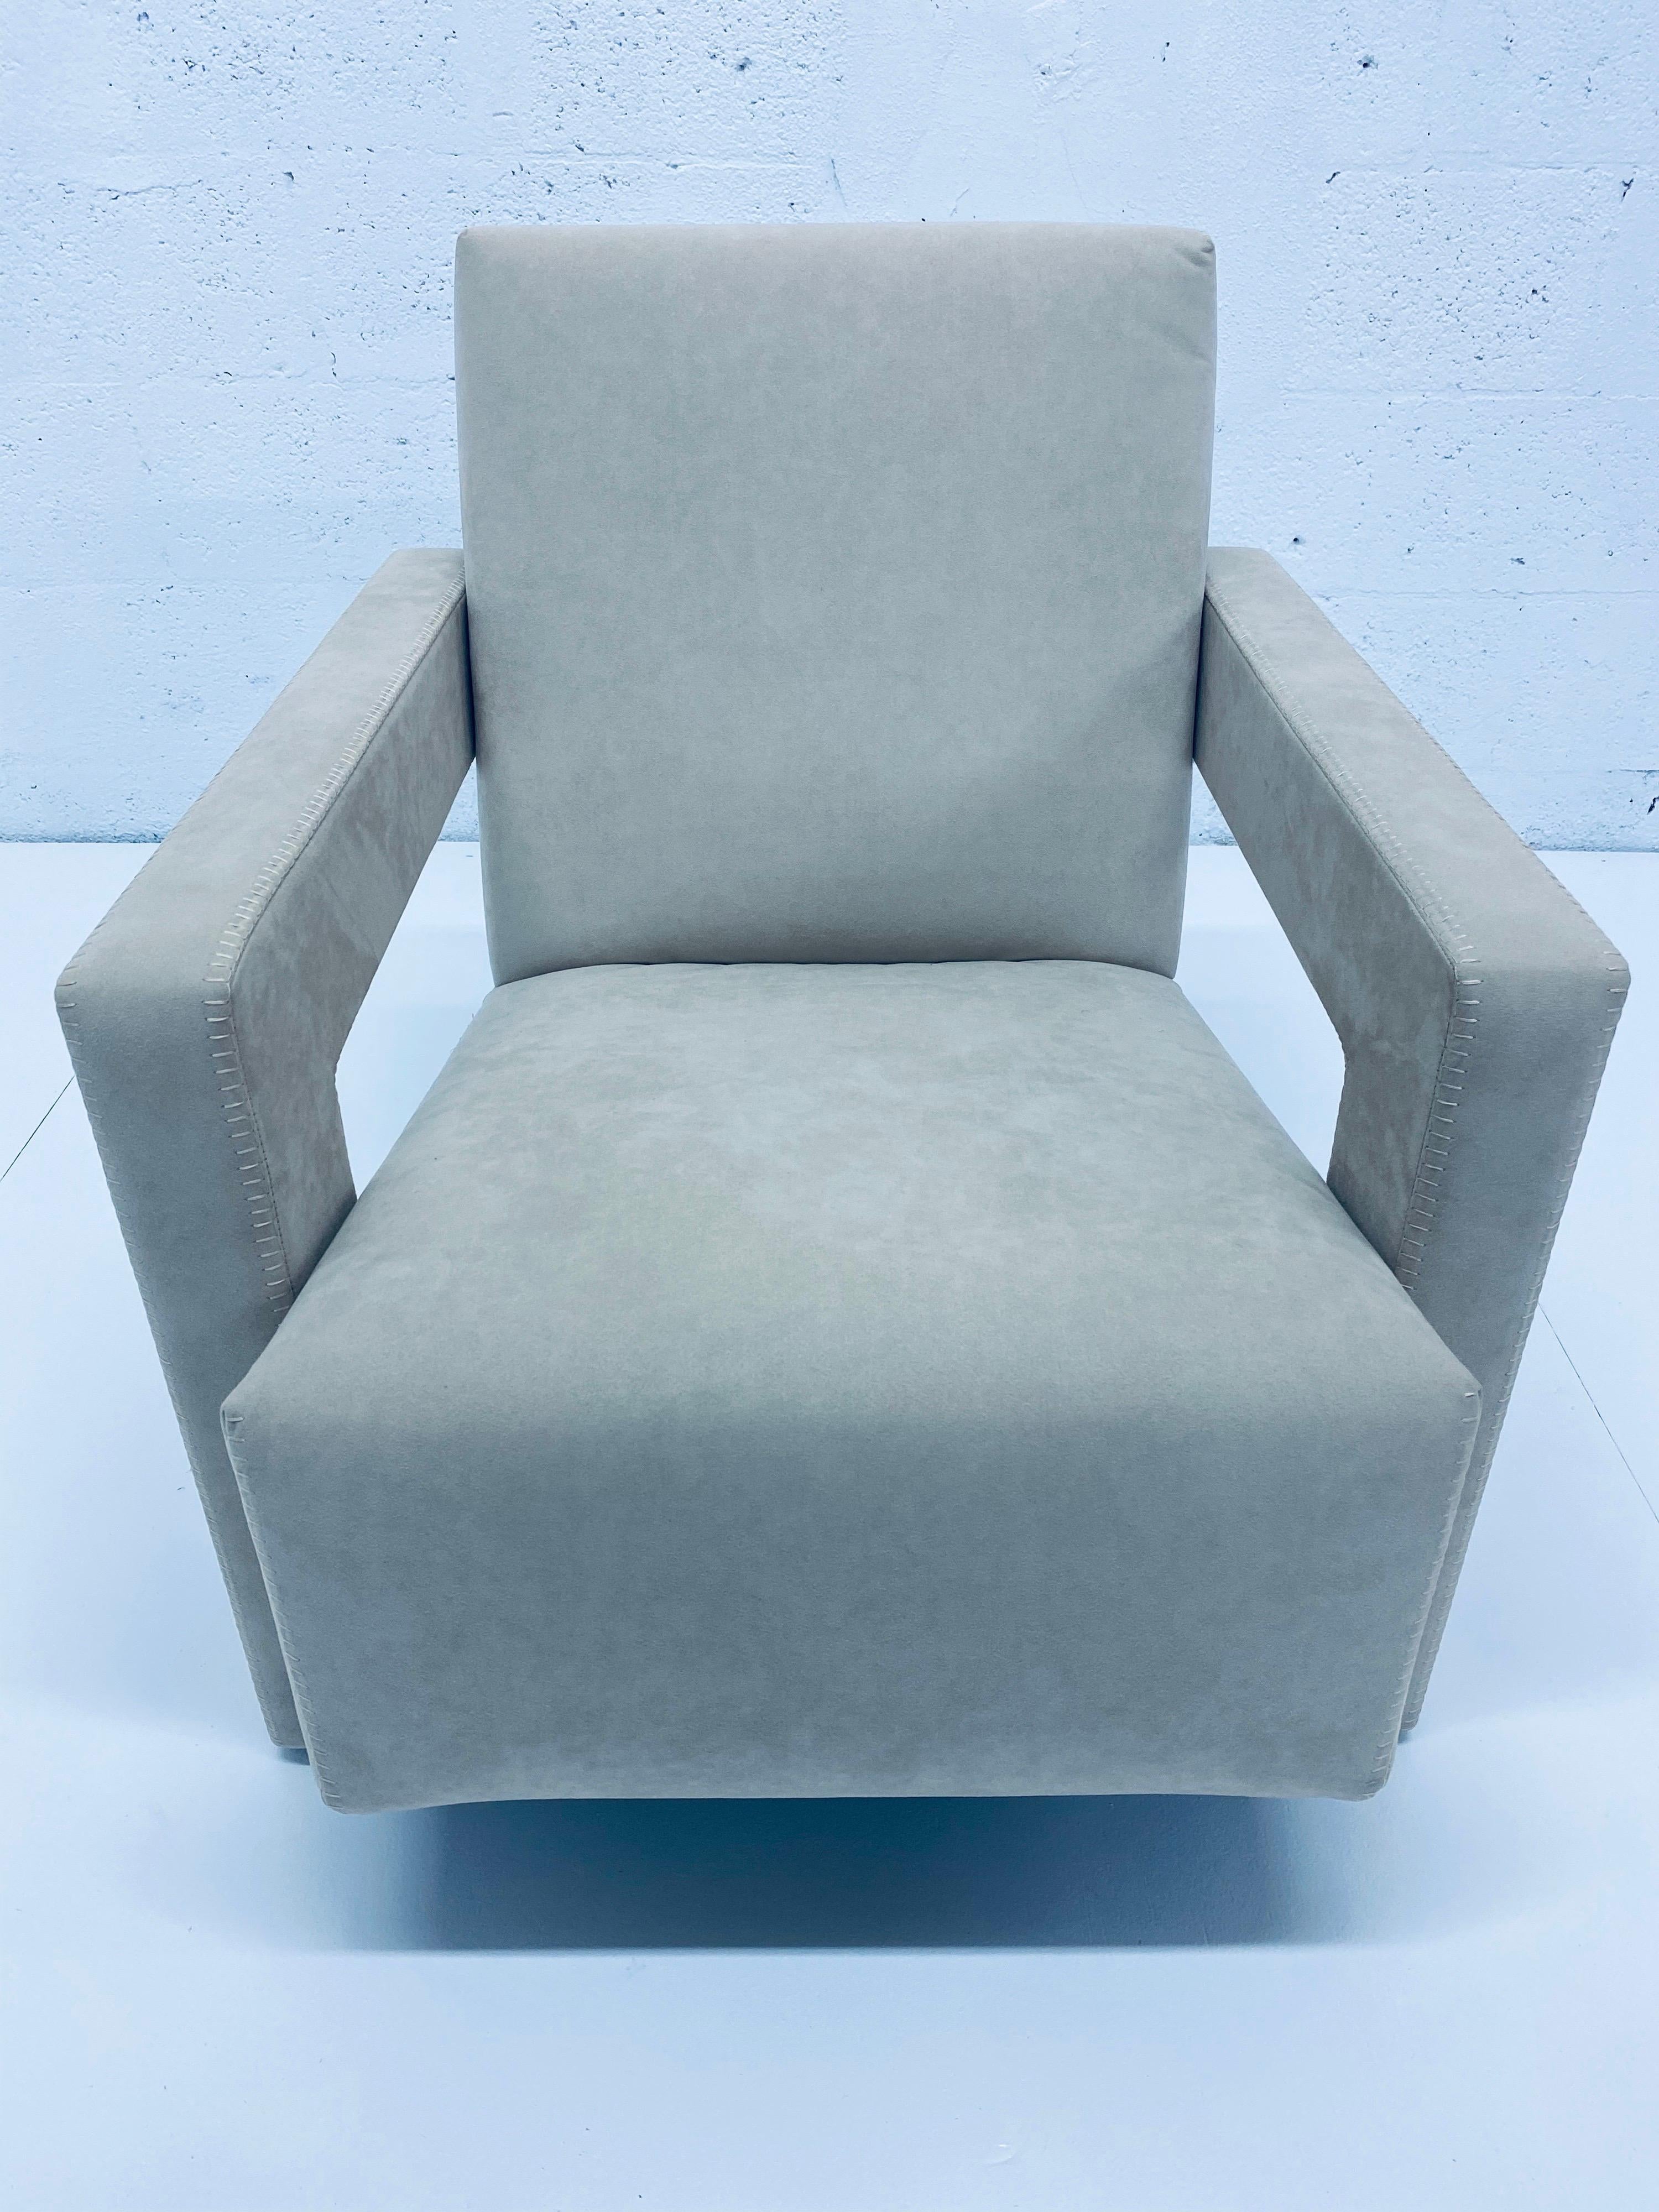 Utrecht lounge chair in off-white, light grey suede leather by Gerrit Rietveld for Cassina.